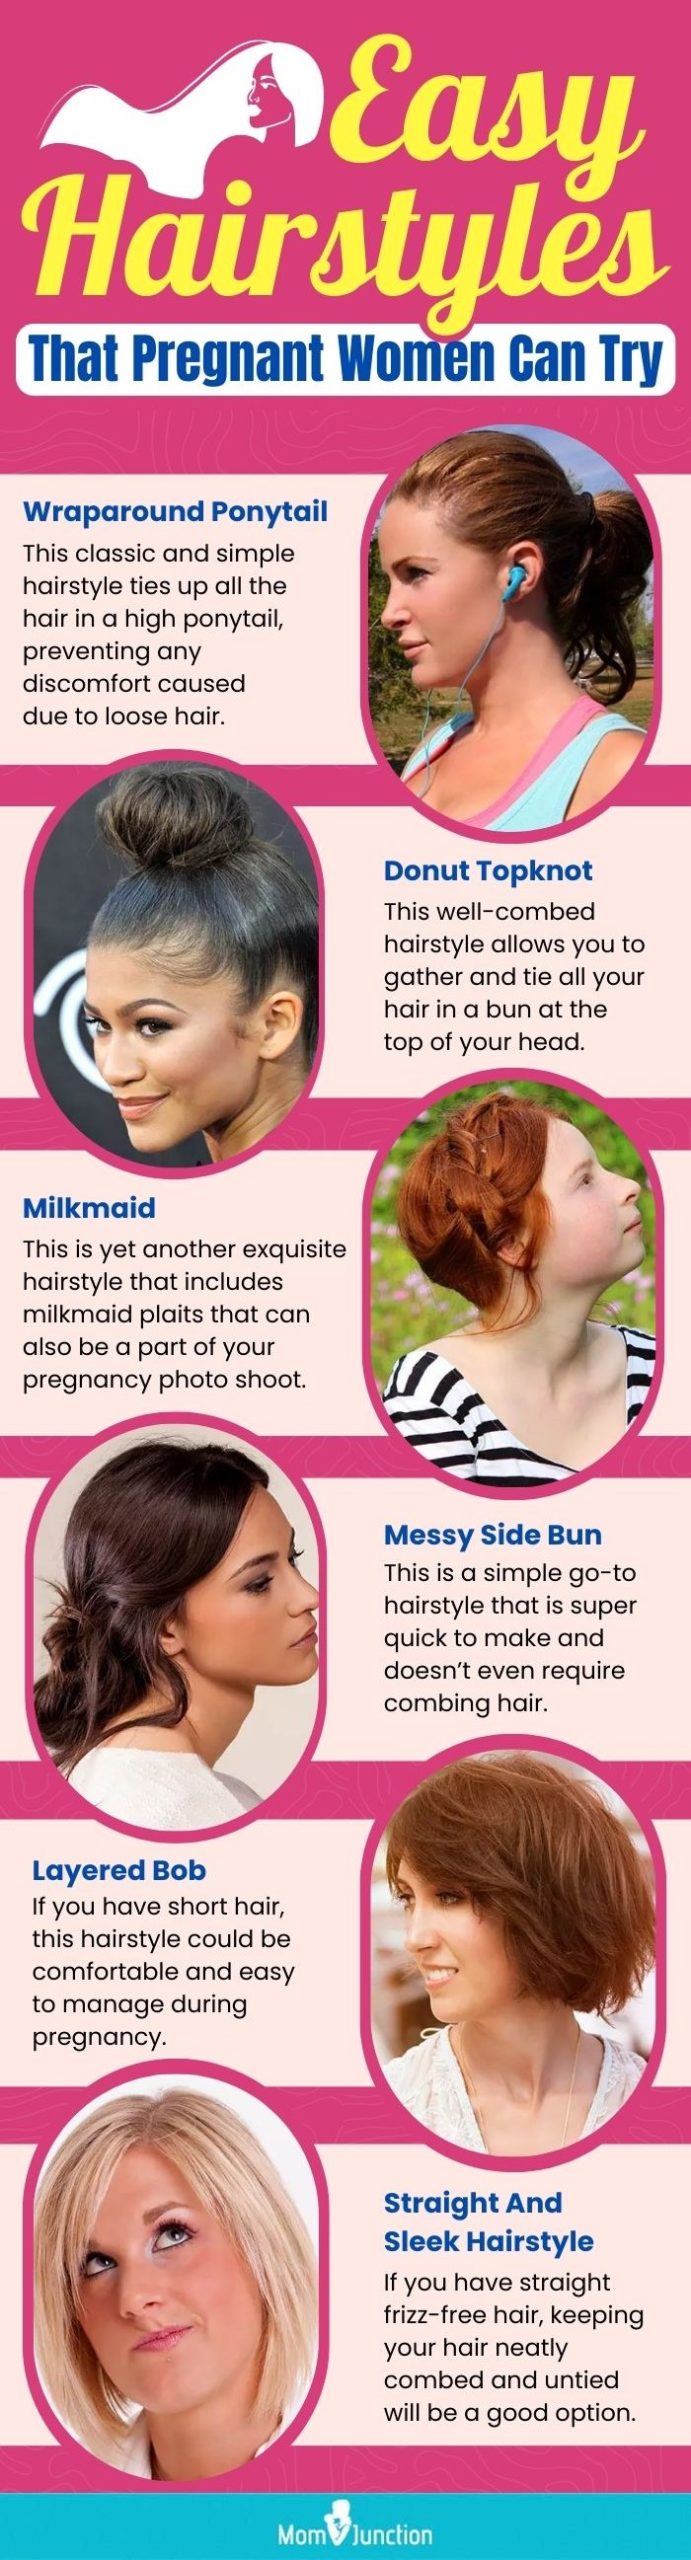 easy hairstyles that pregnant women can try (infographic)